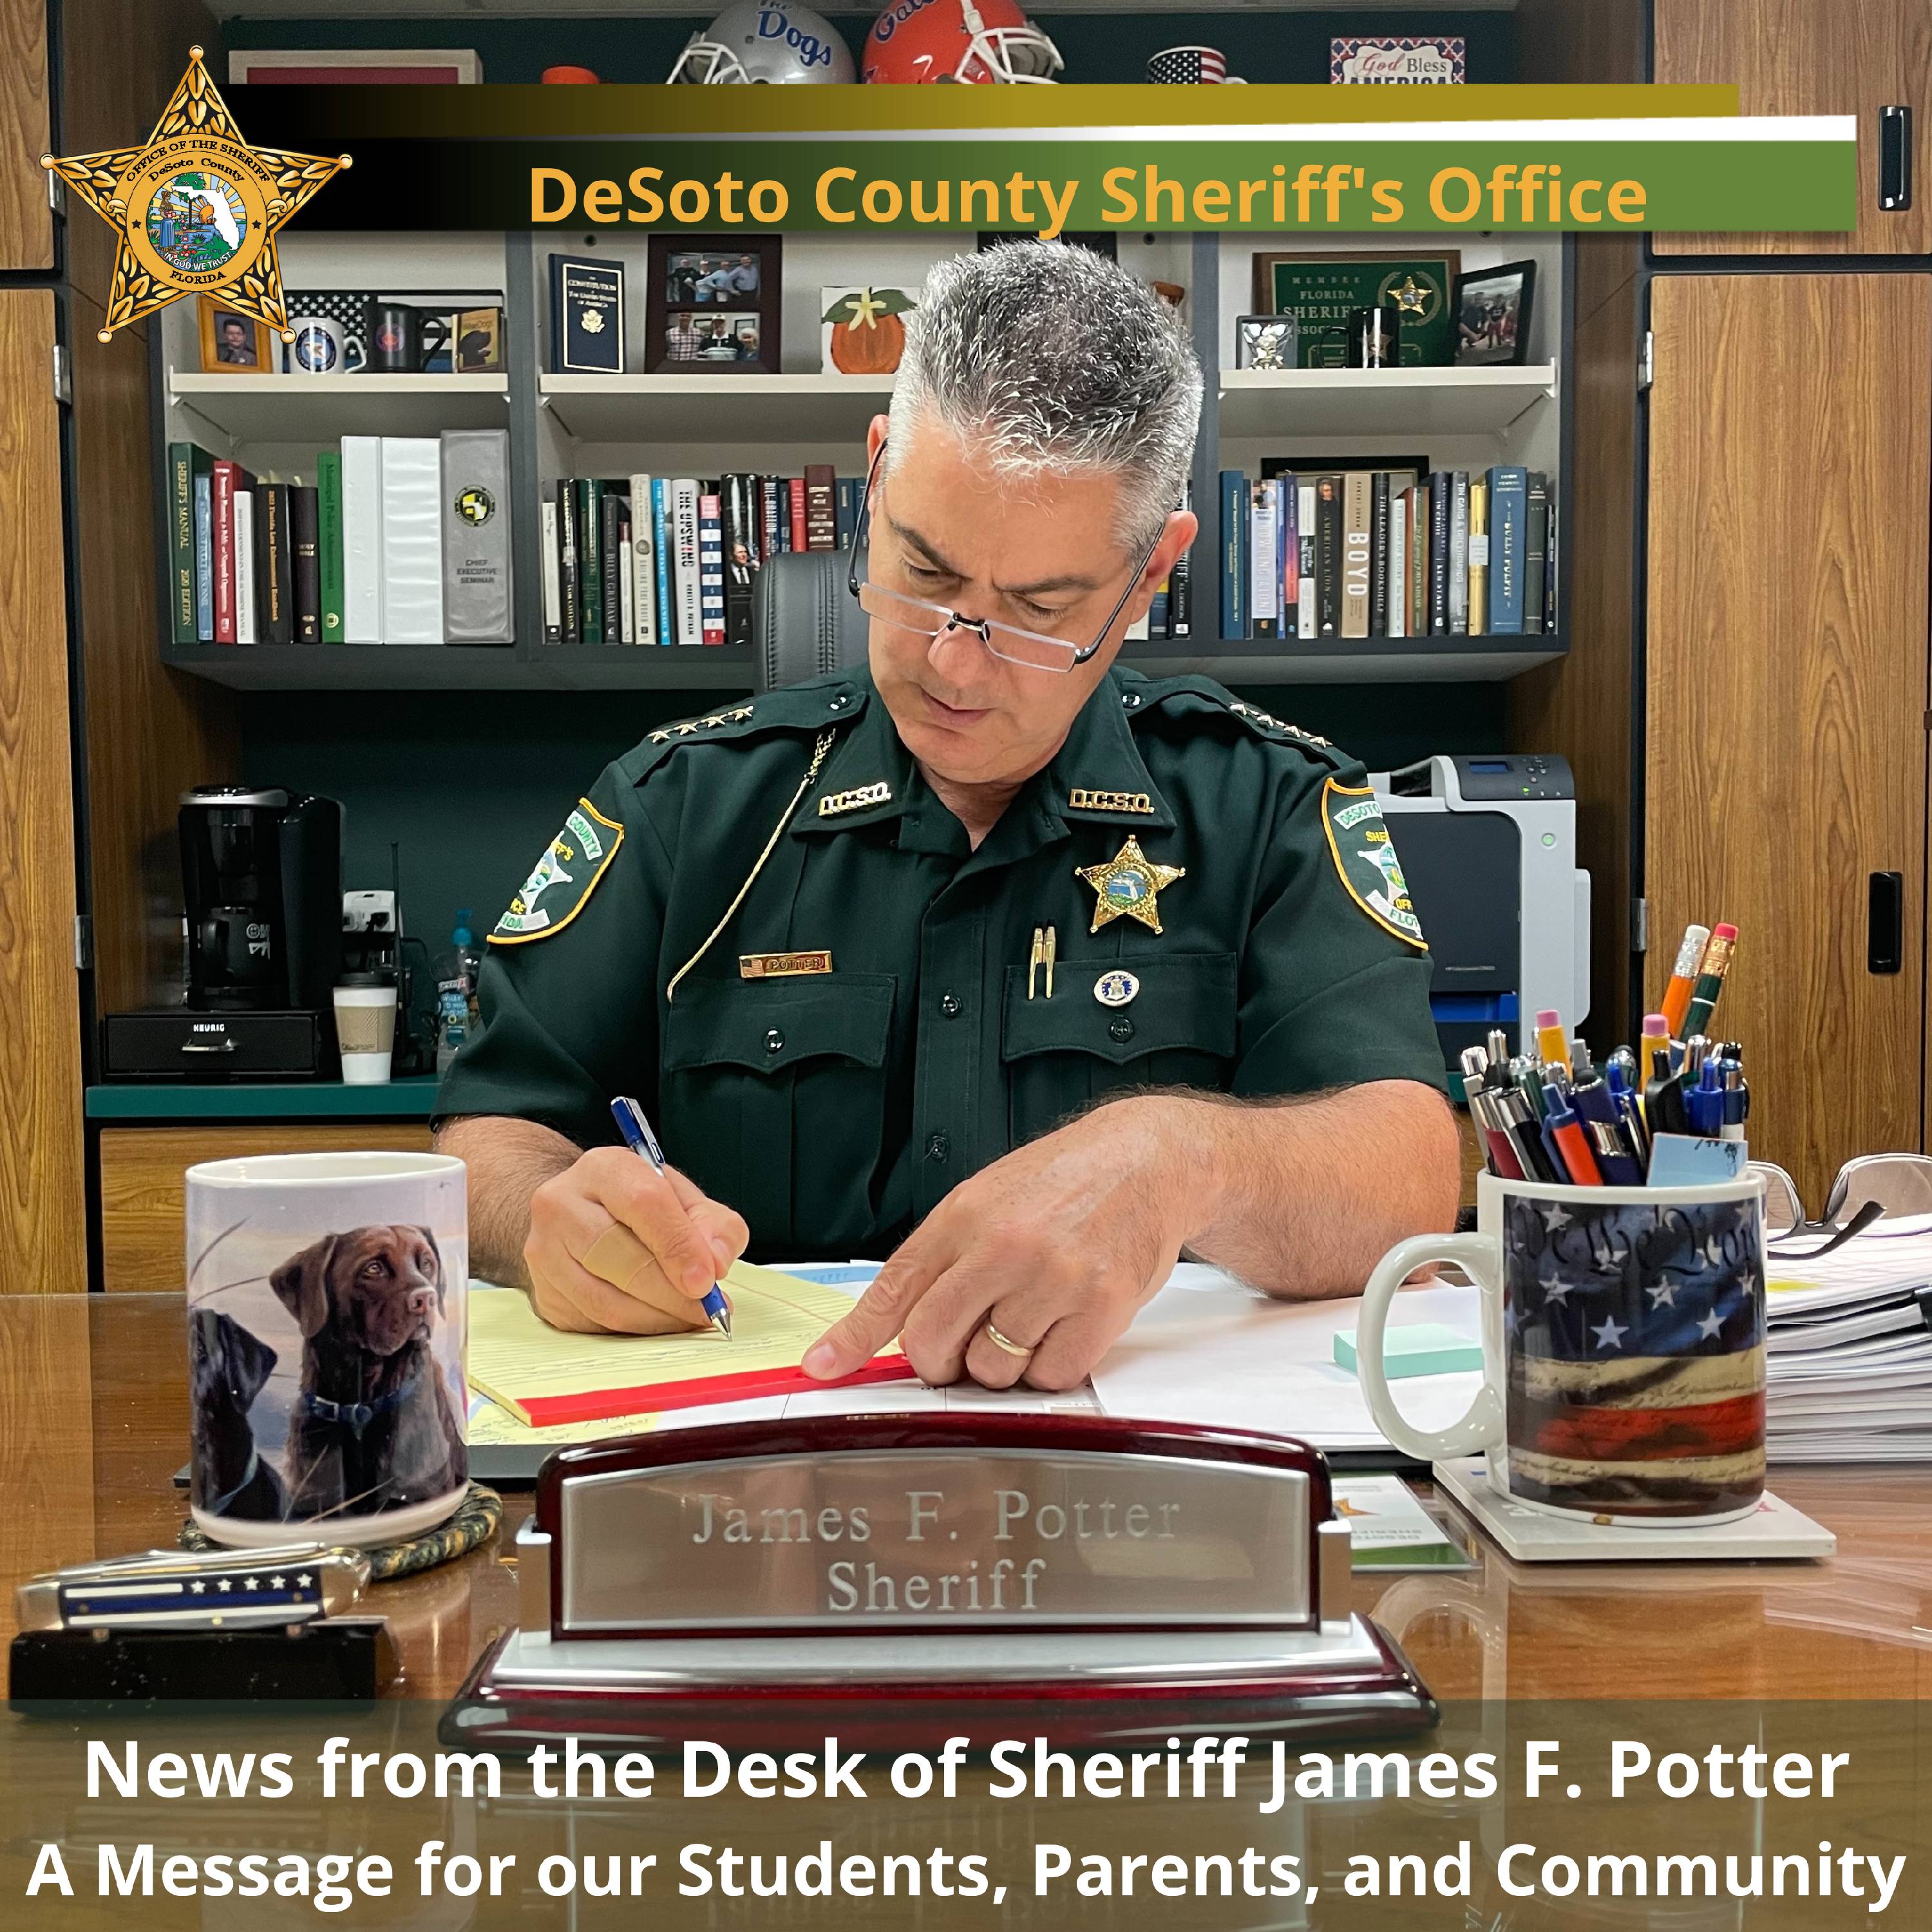 Sheriff Potter writing a Message for our Students, Parents, and Community - Copy